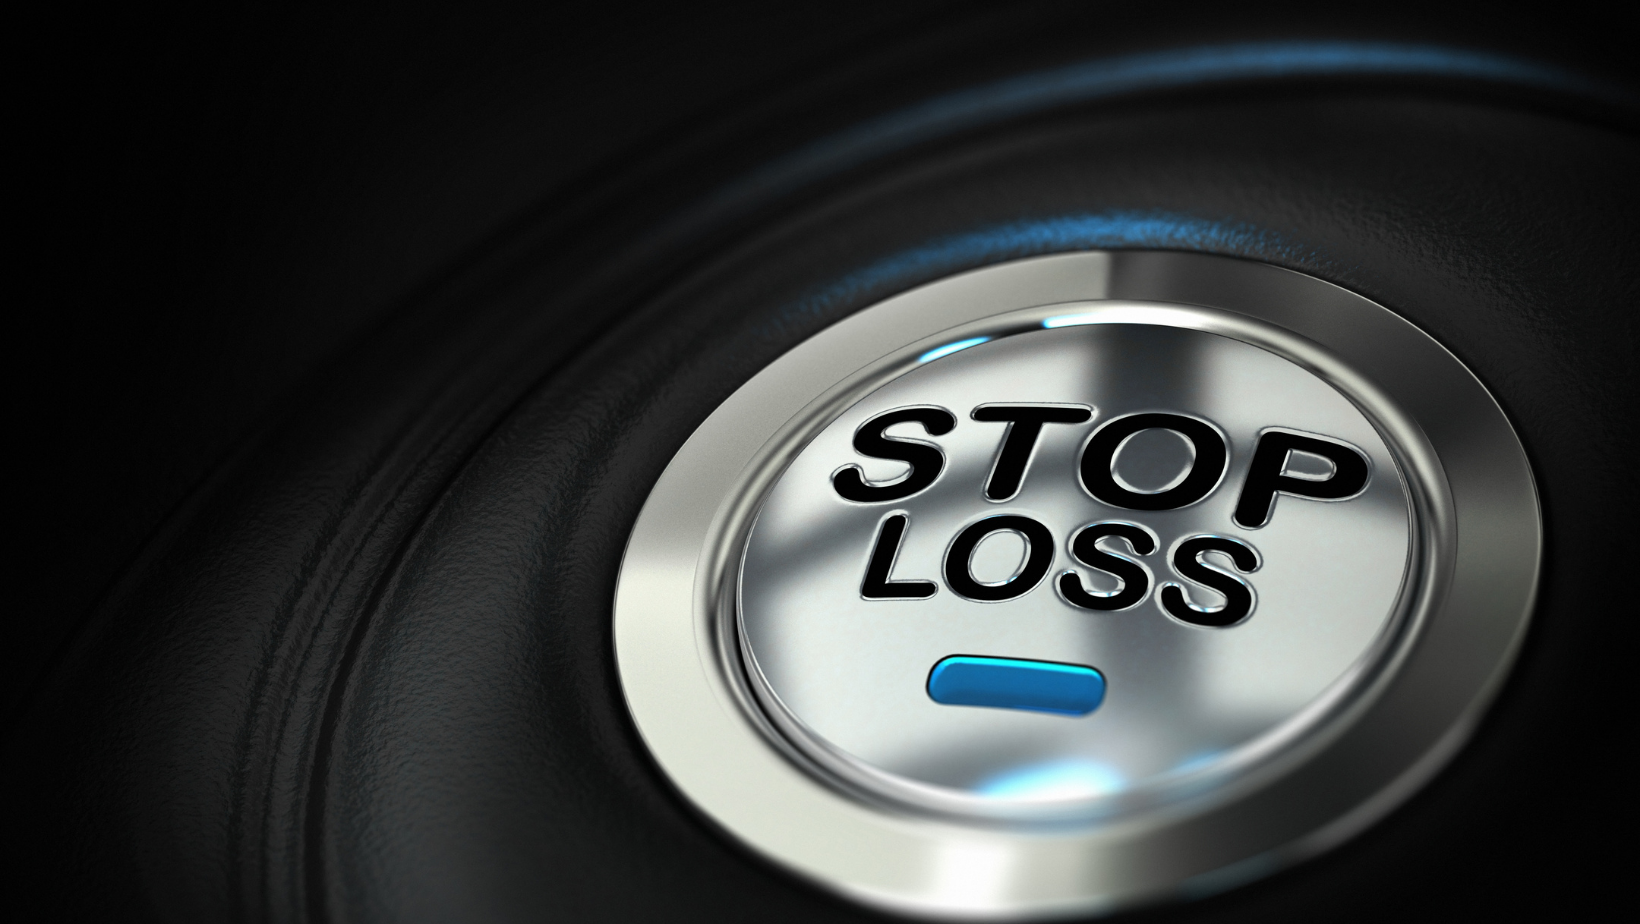 Stop-loss is a useful feature in trading